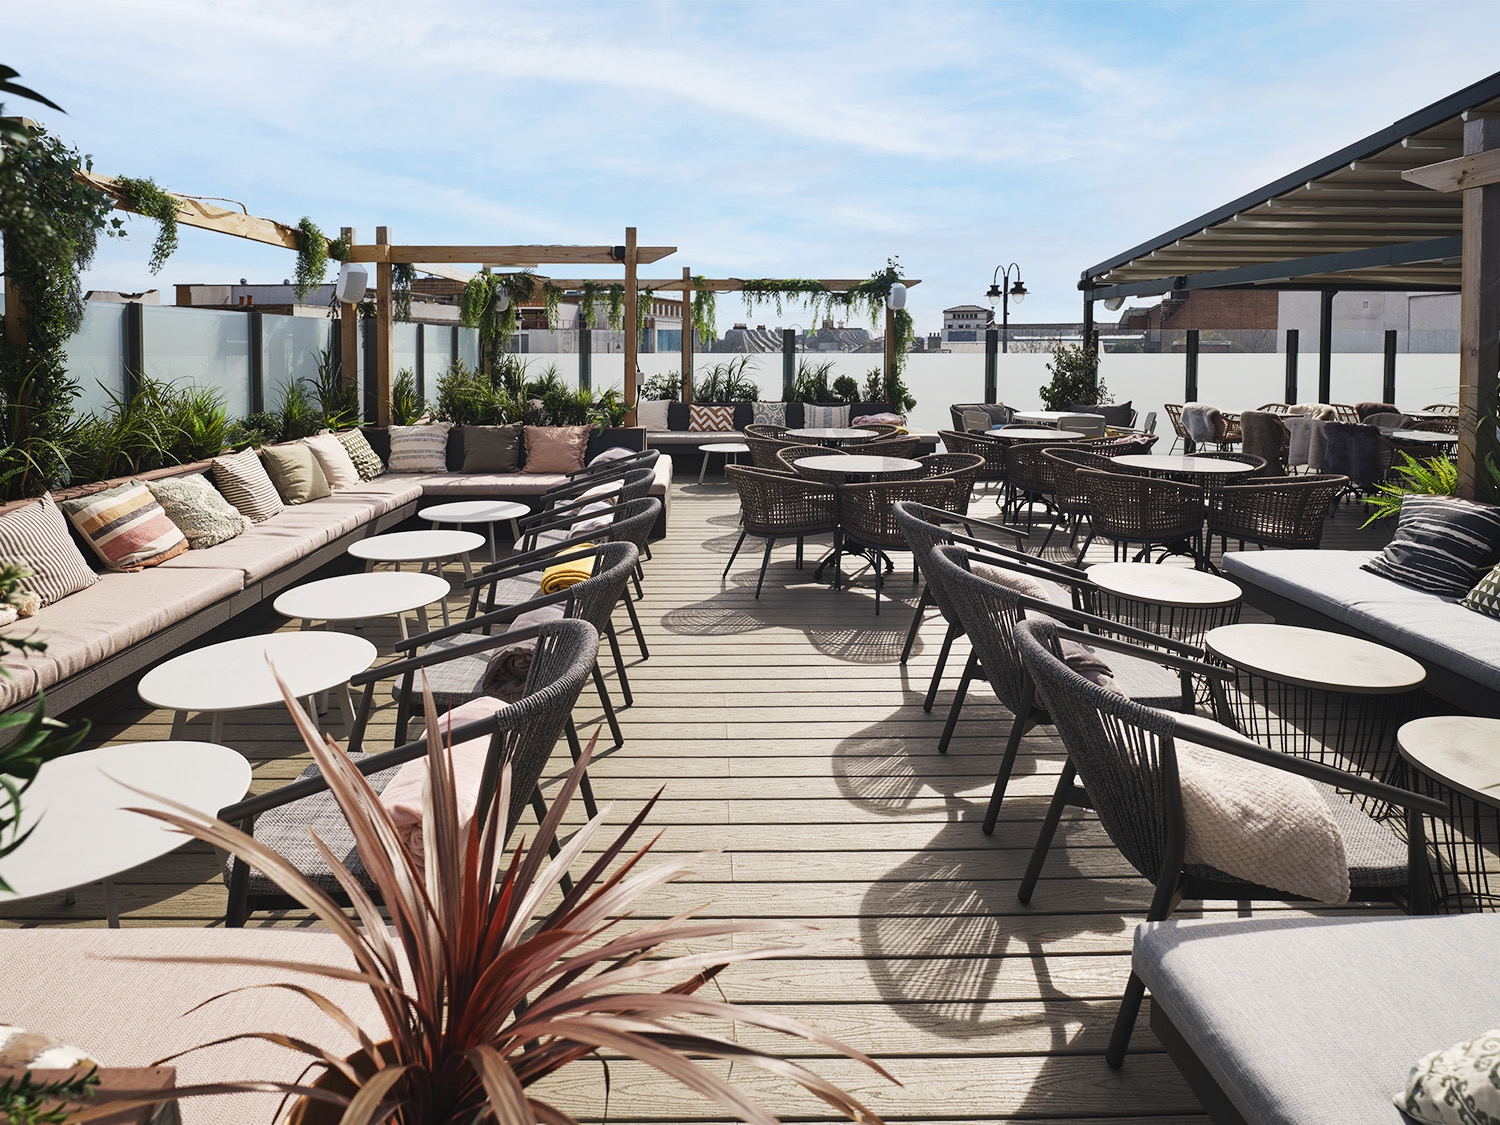 SINTILLATE Bank Holiday Rooftop Party at The Corin